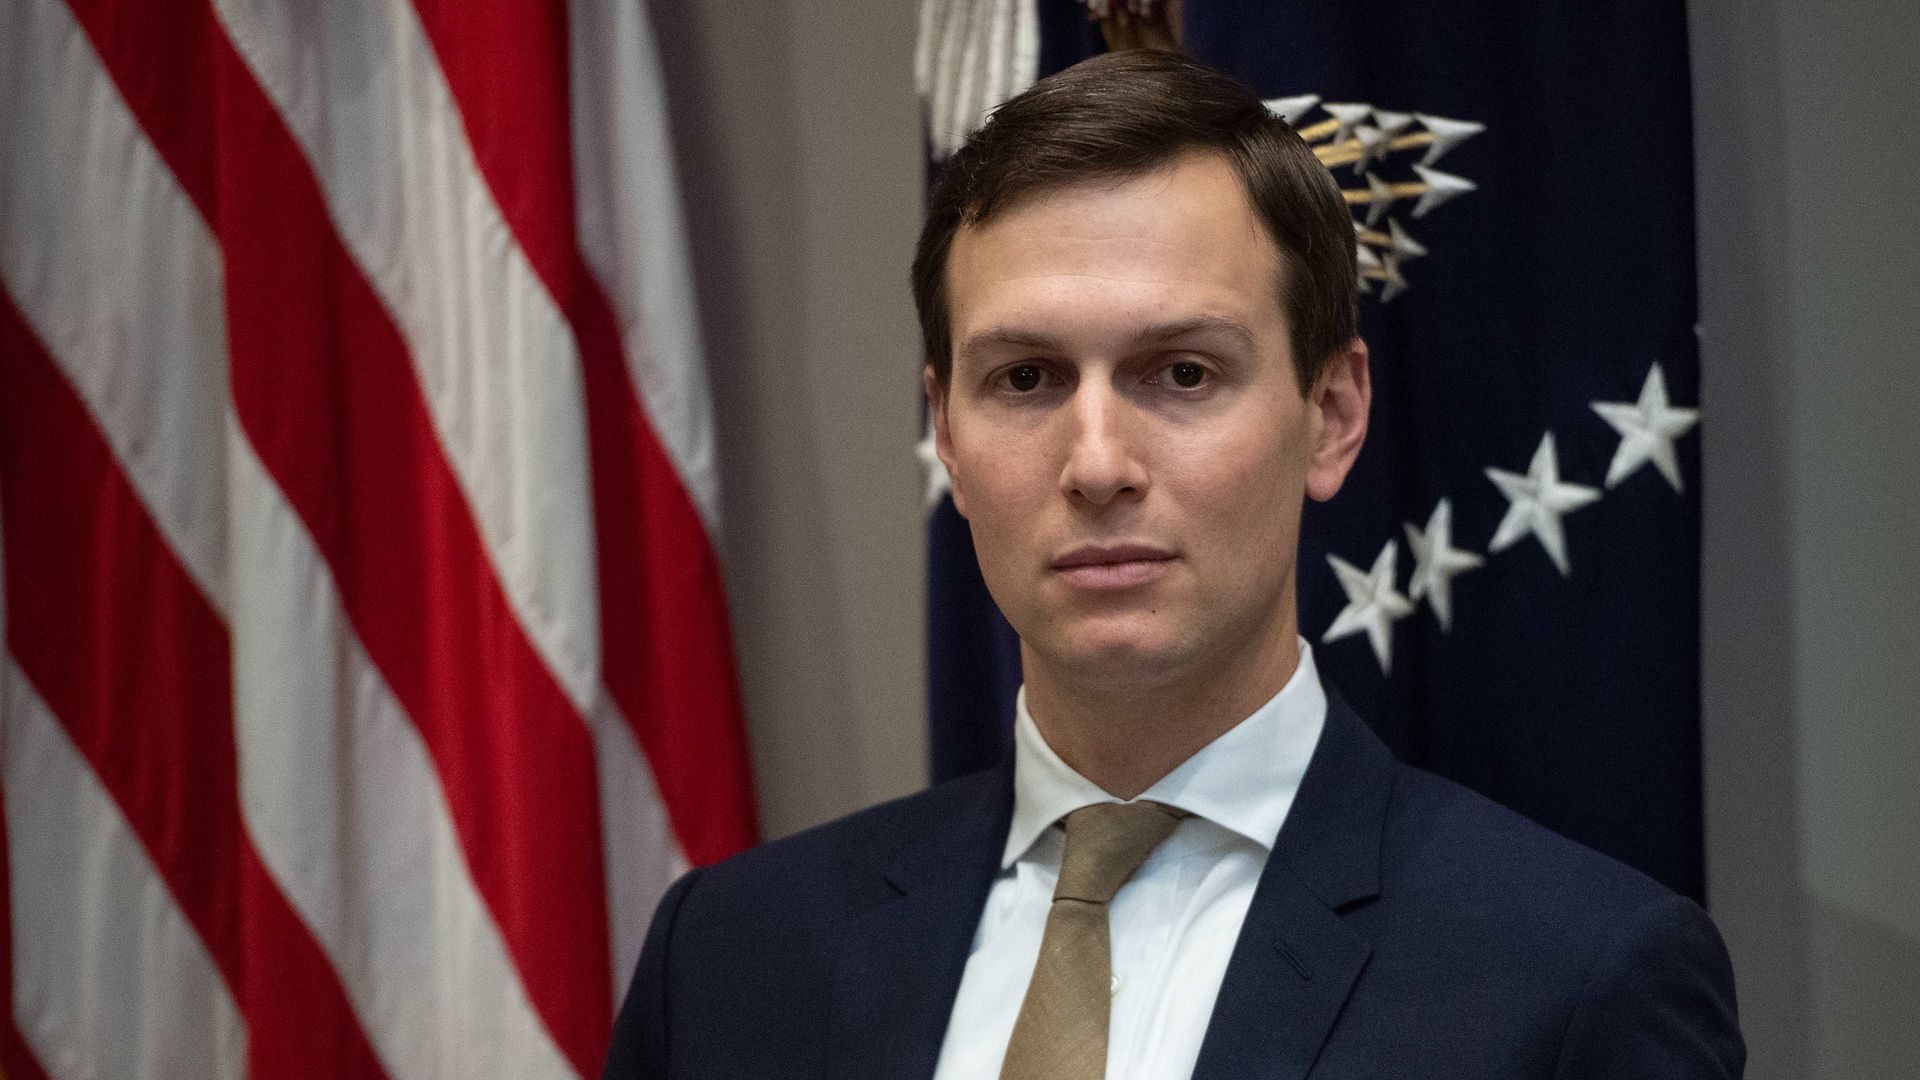 Jared Kushner, advisor and son-in-law of President Trump Photo: Nicholas Kamm/AFP/Getty Images